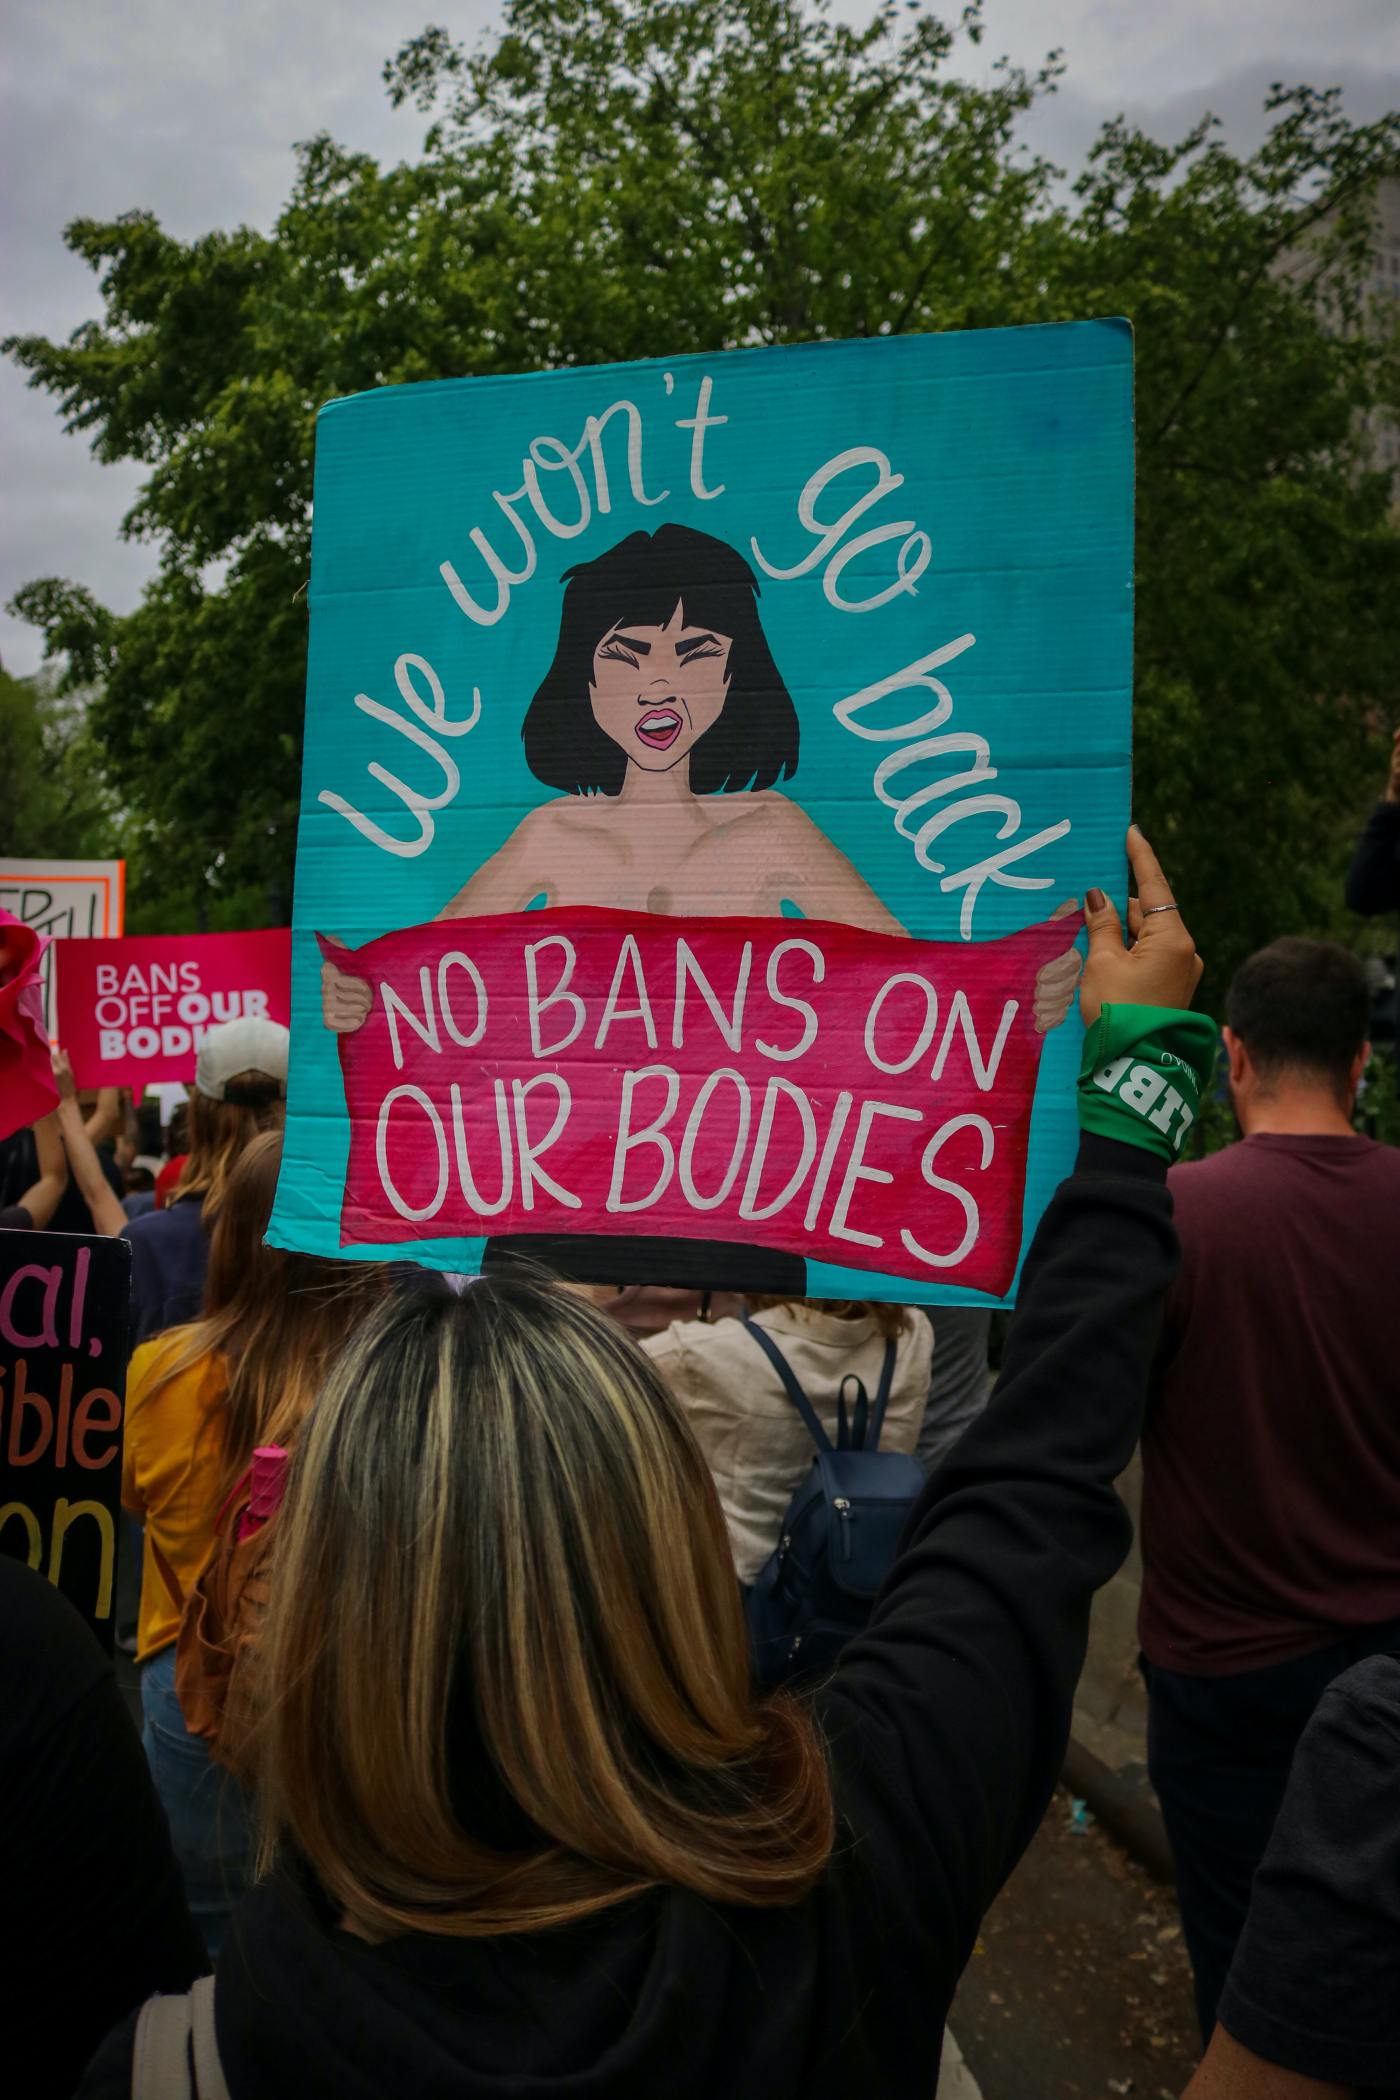 a "bans off our bodies" sign held by a woman in a pro-choice rally